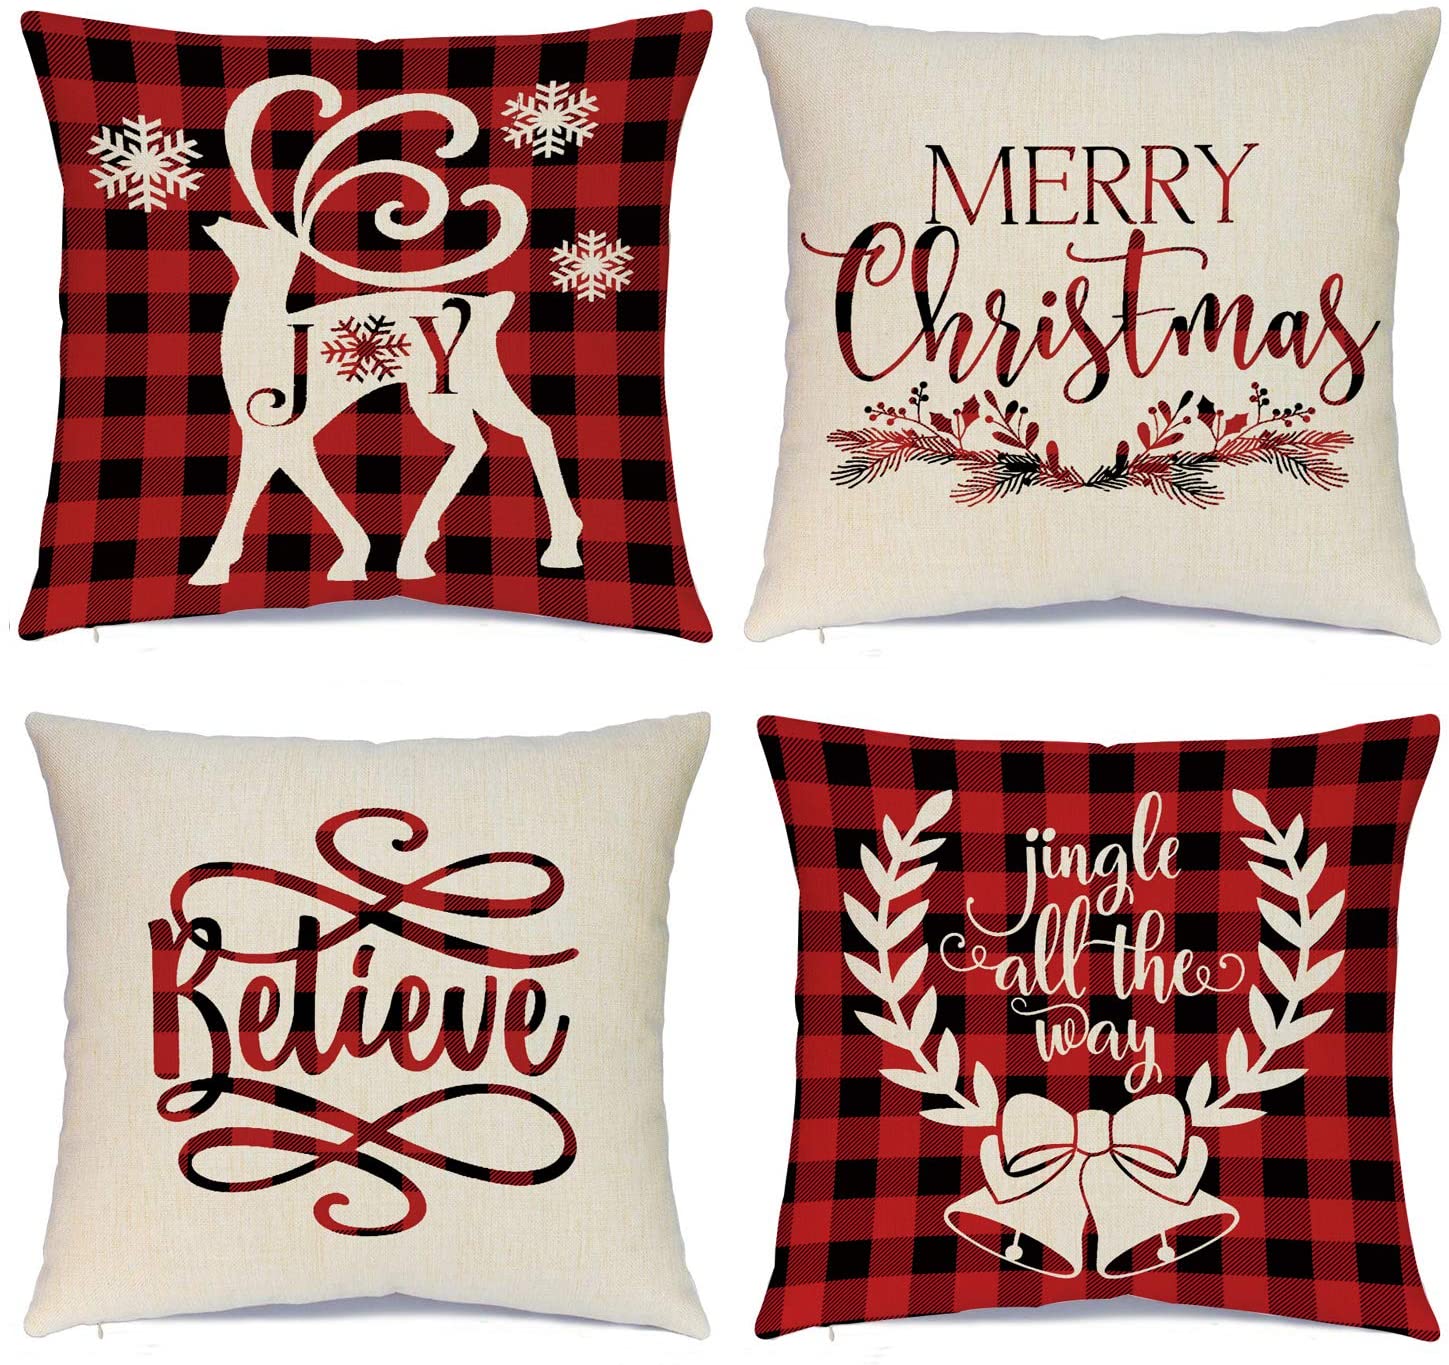 Hlonon Christmas Decorations Pillow Covers 18 x 18 Inch Set of 4